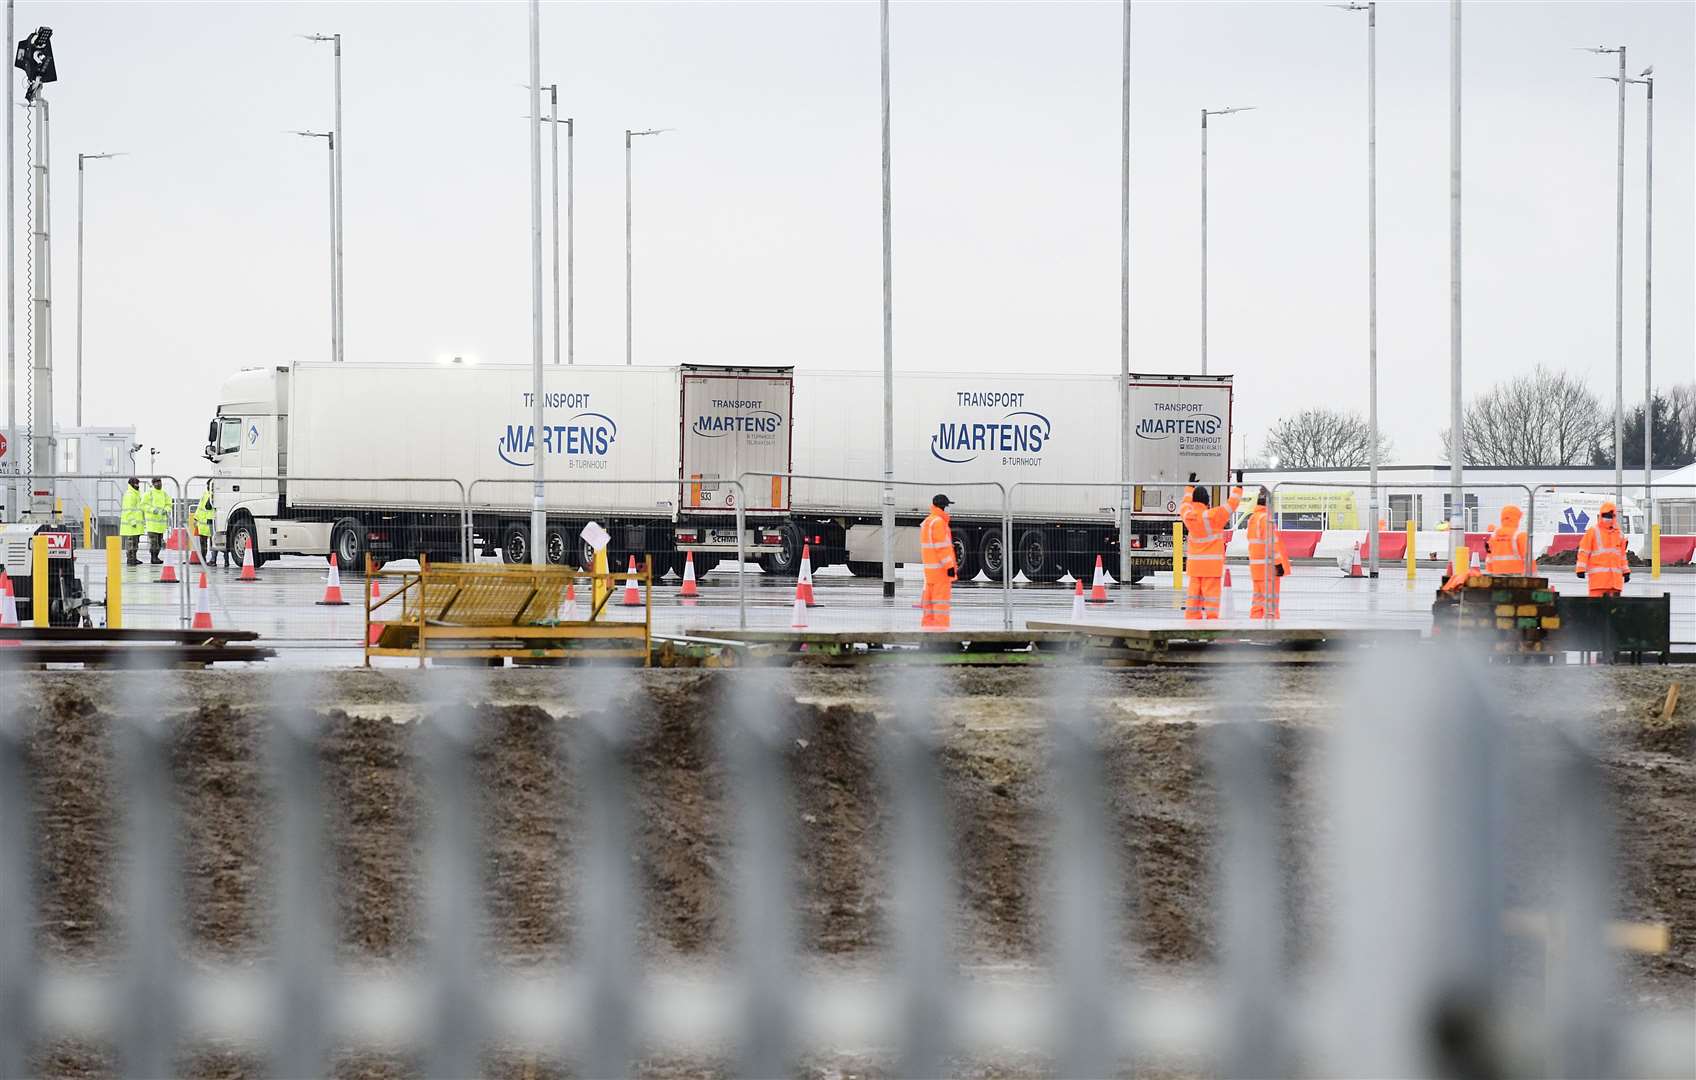 The Sevington Inland Border Facility opened on Monday. Picture: Barry Goodwin